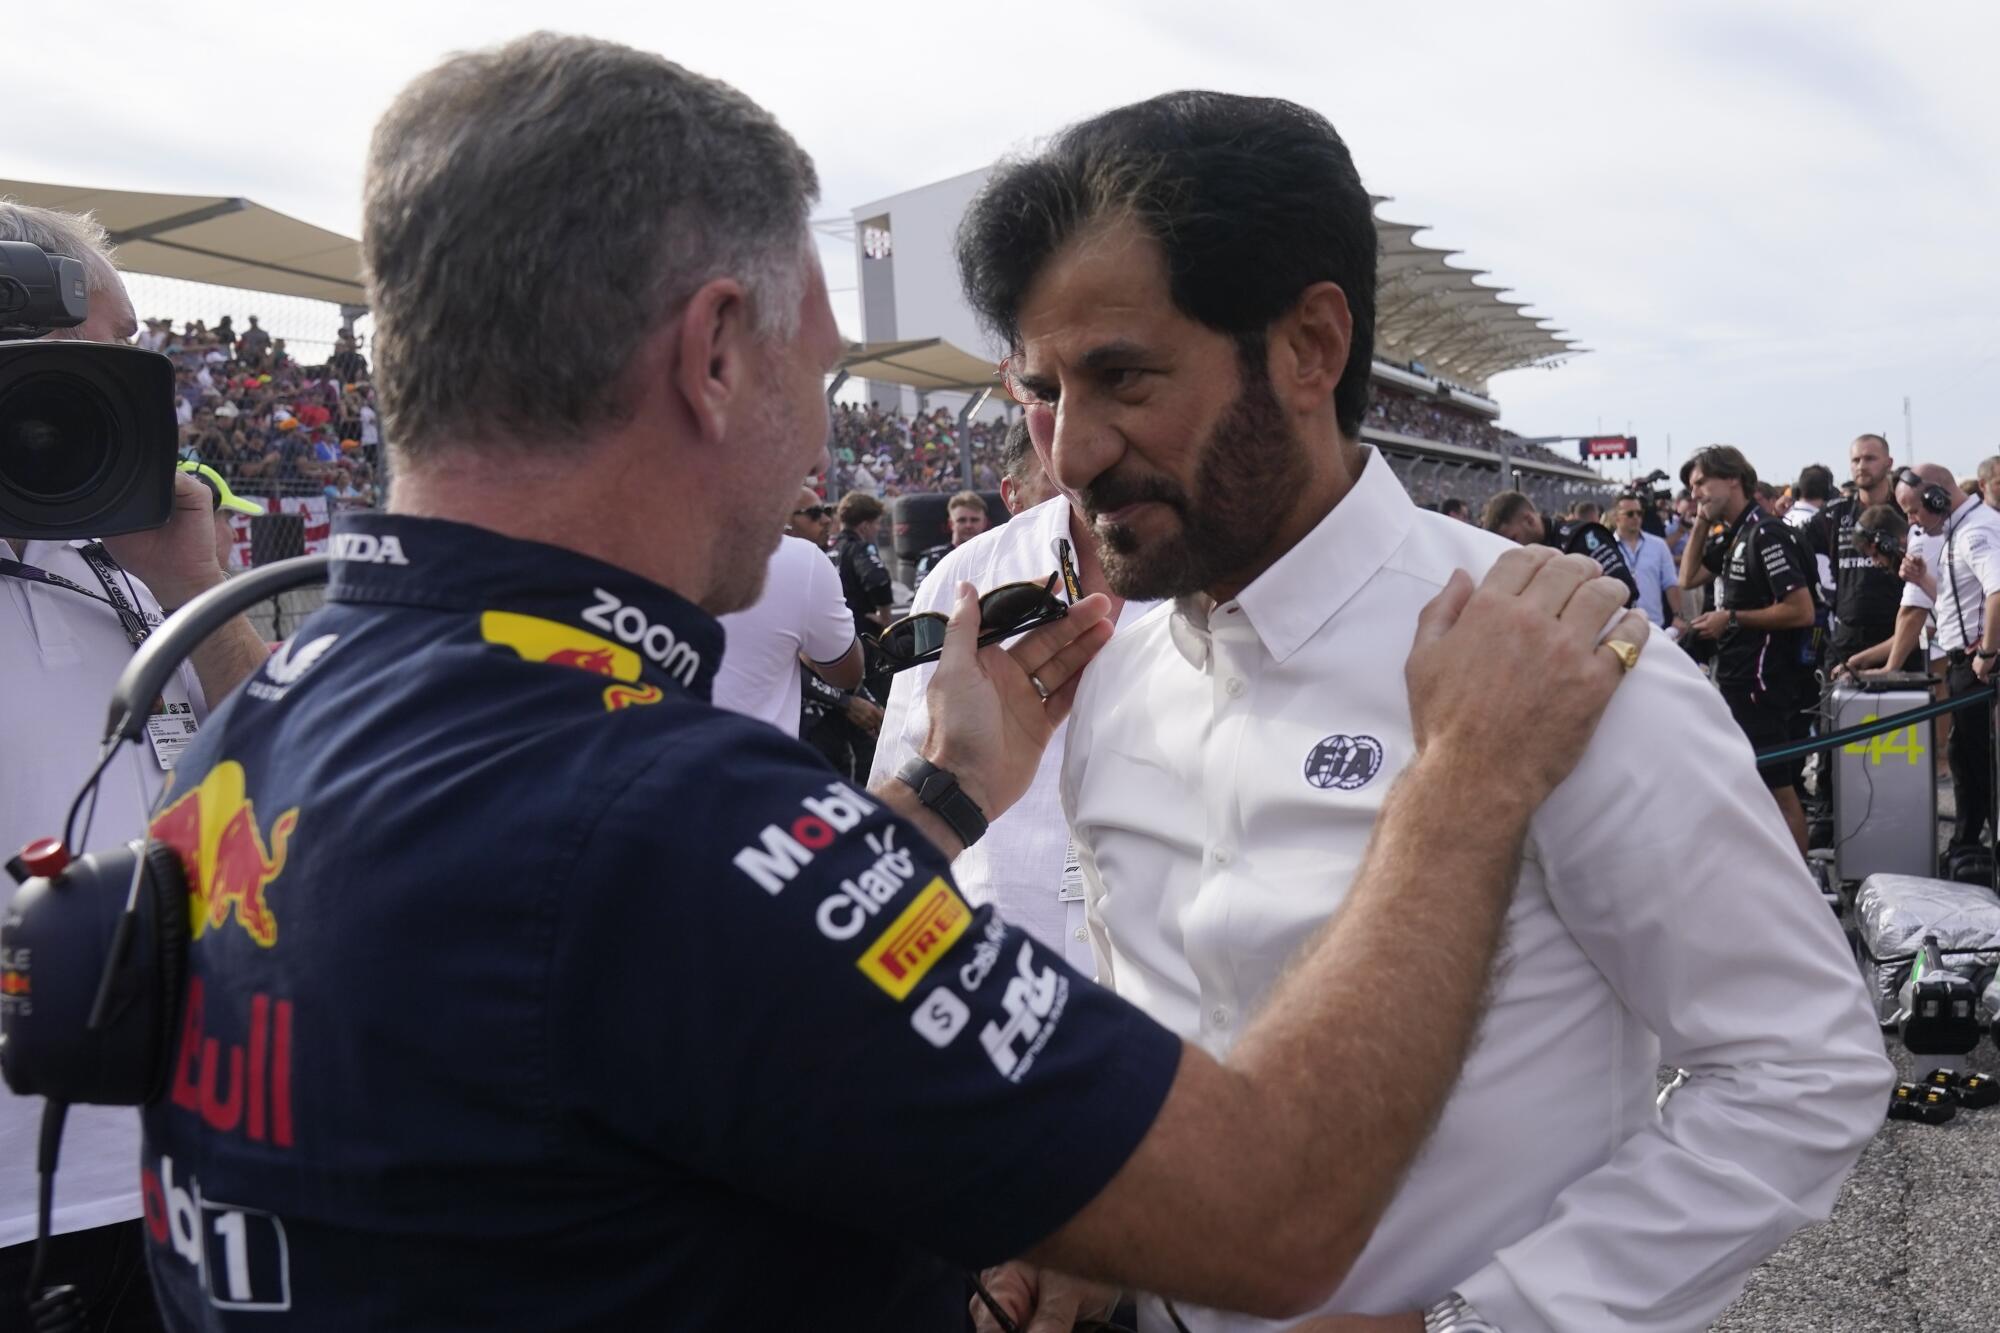 A man wearing race team clothing speaks to a man wearing a white buttondown with a logo that reads "FIA." 